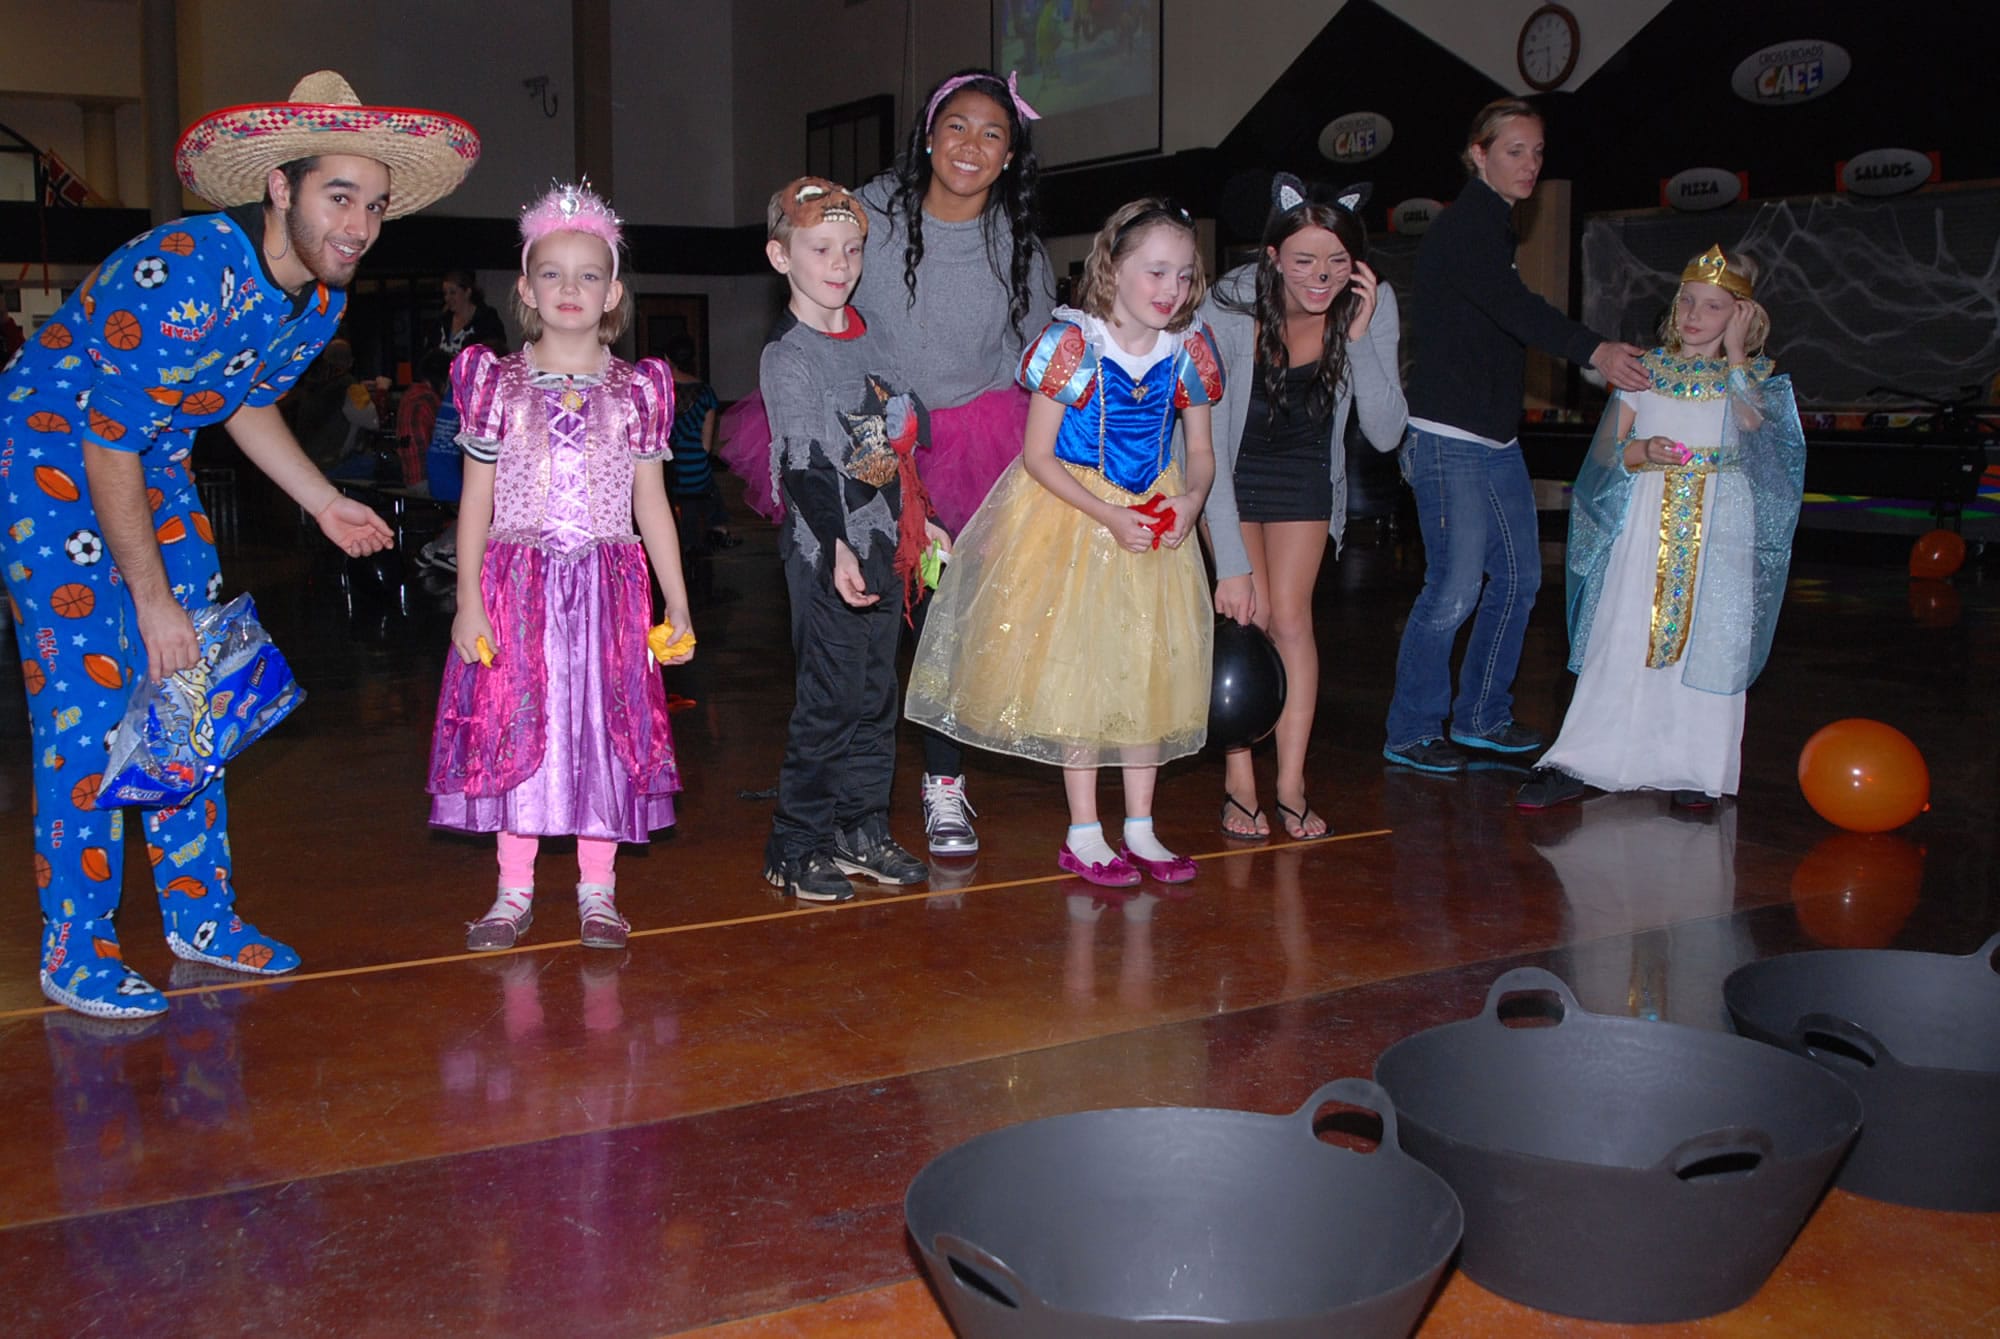 Washougal: Washougal High School's Interact Club members entertain elementary school students at their Monster Mash carnival on Halloween.